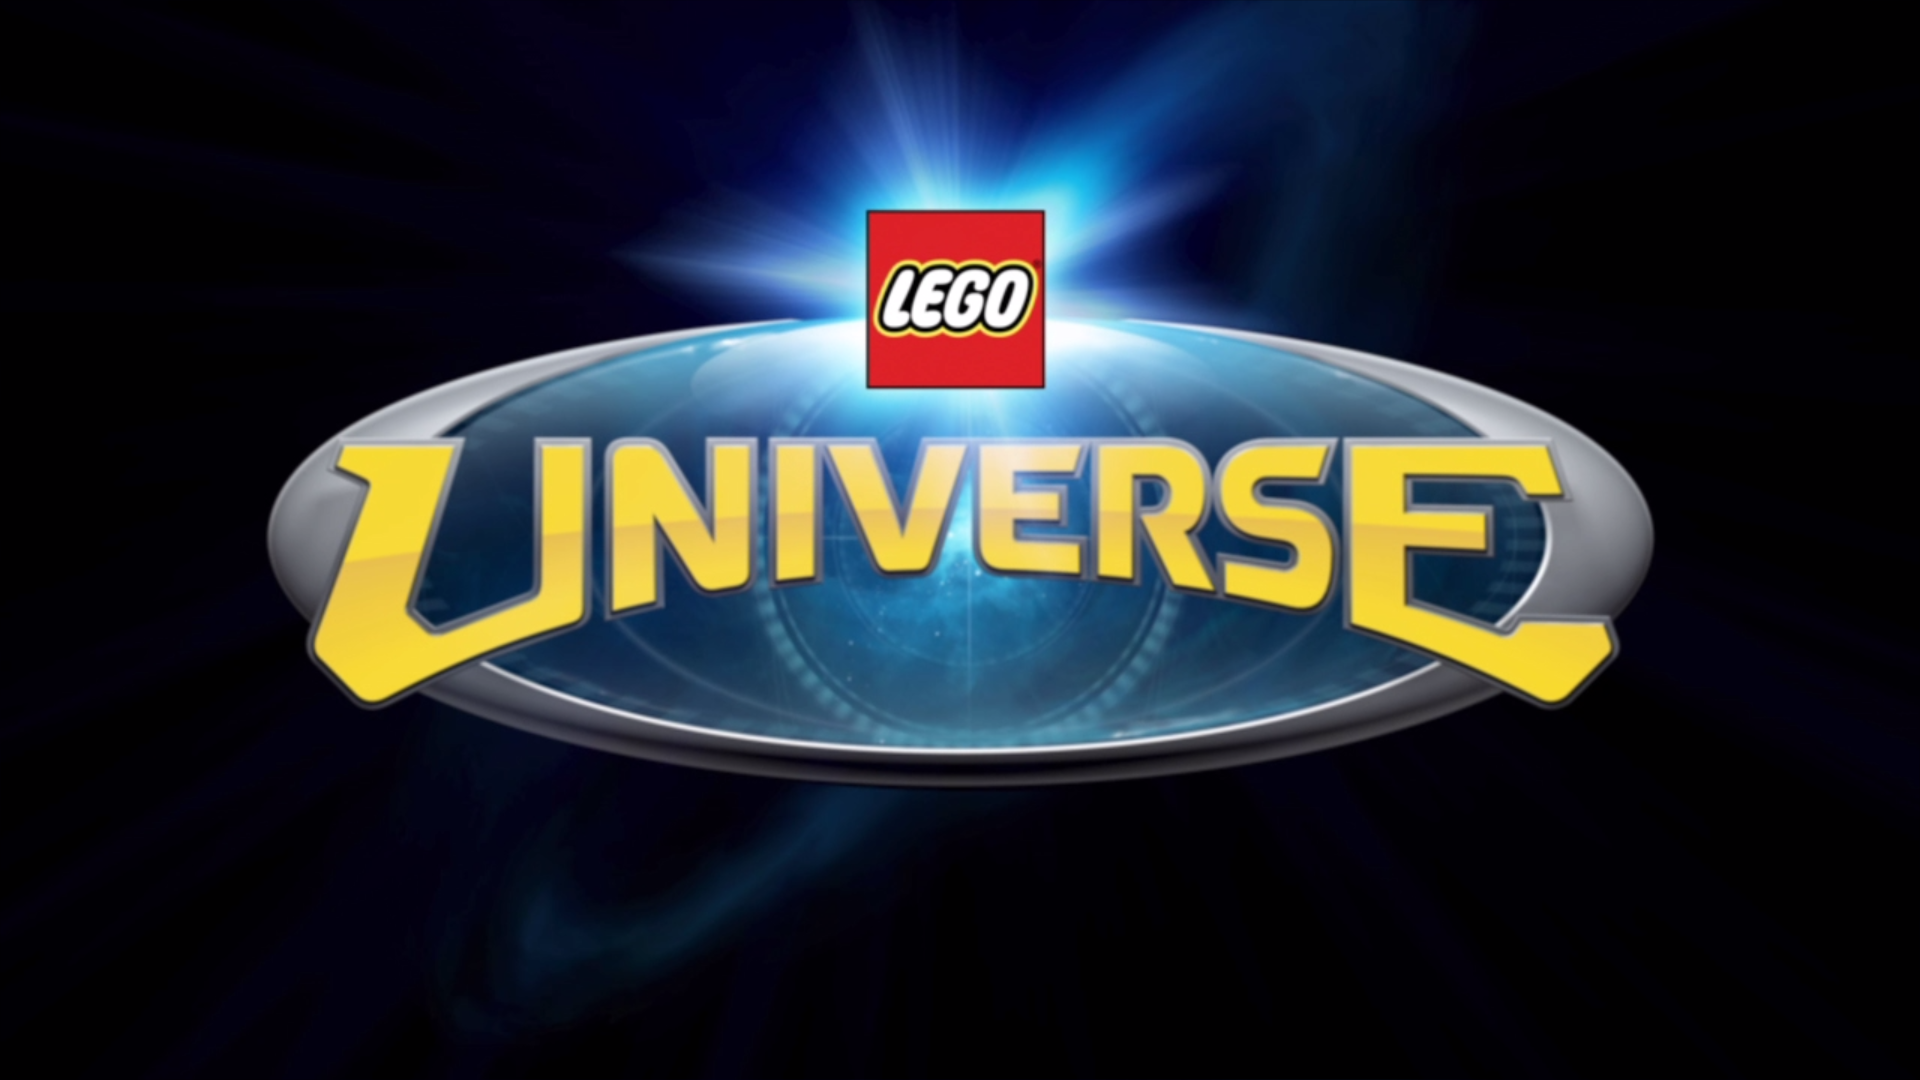 Lego Universe Shuts Down After Just One Year